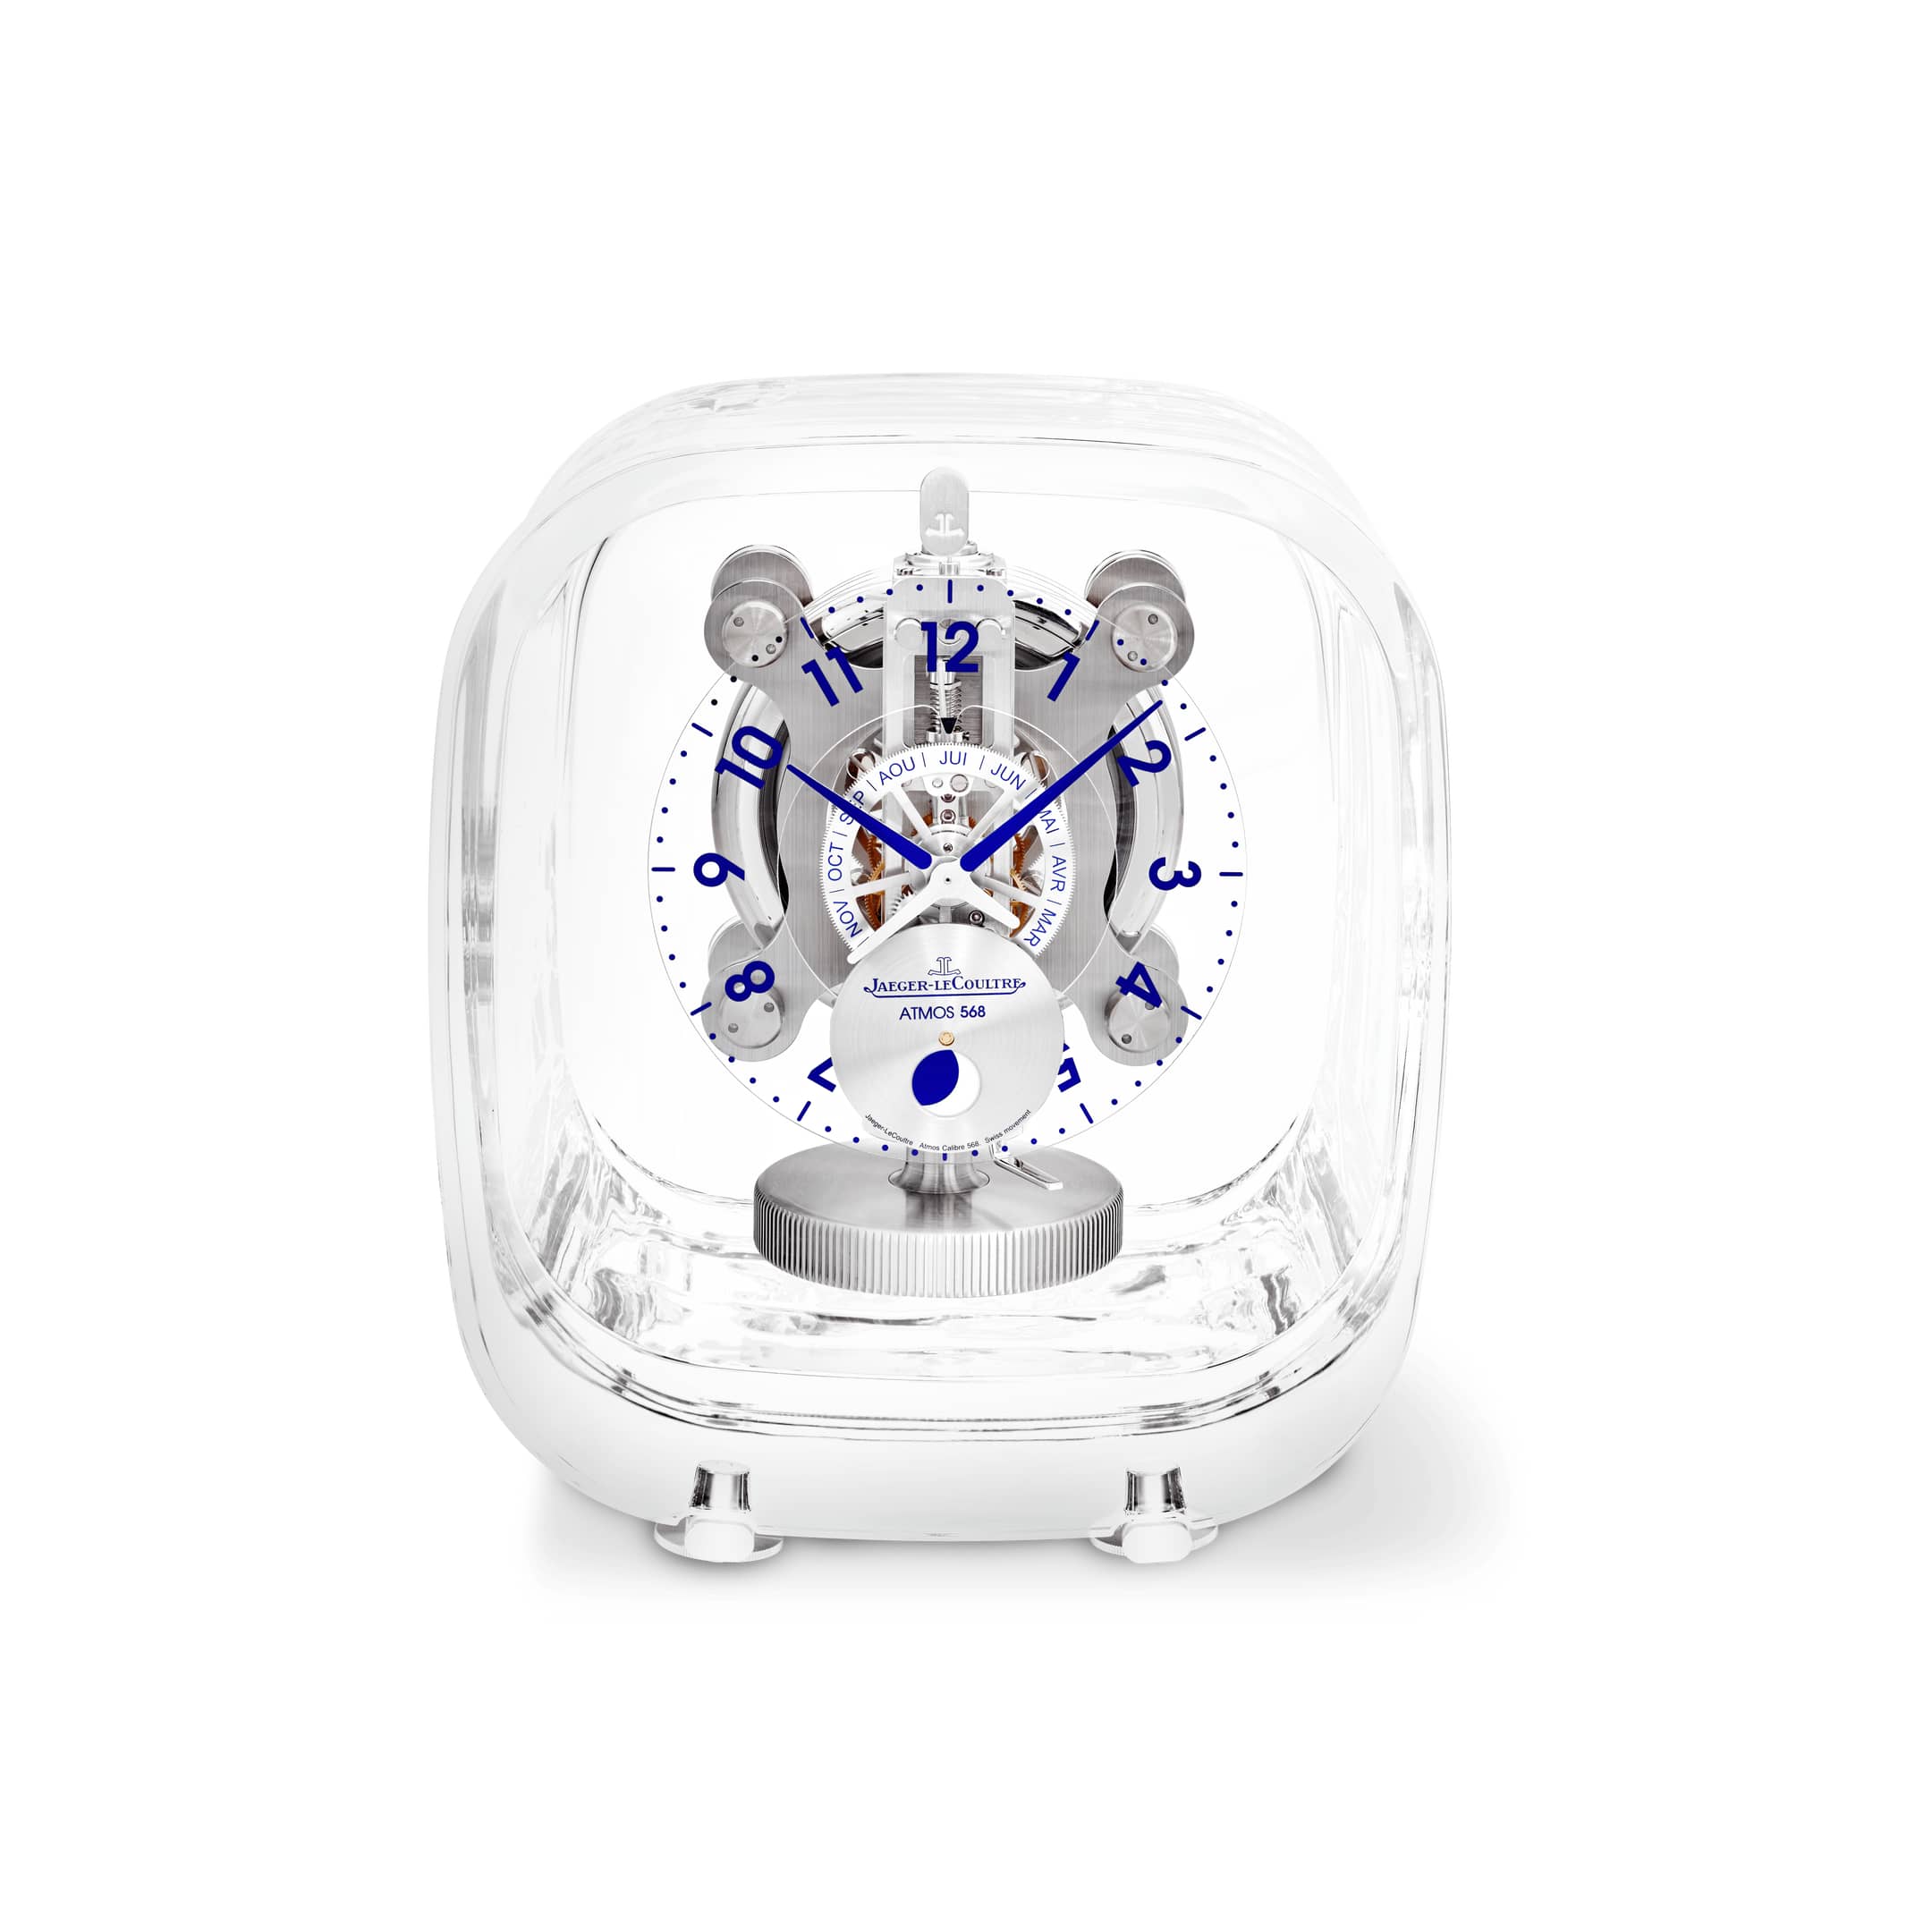 Baccarat Crystal Unisex Watch Perpetual movement Atmos 568 by Marc Newson  Q516510J